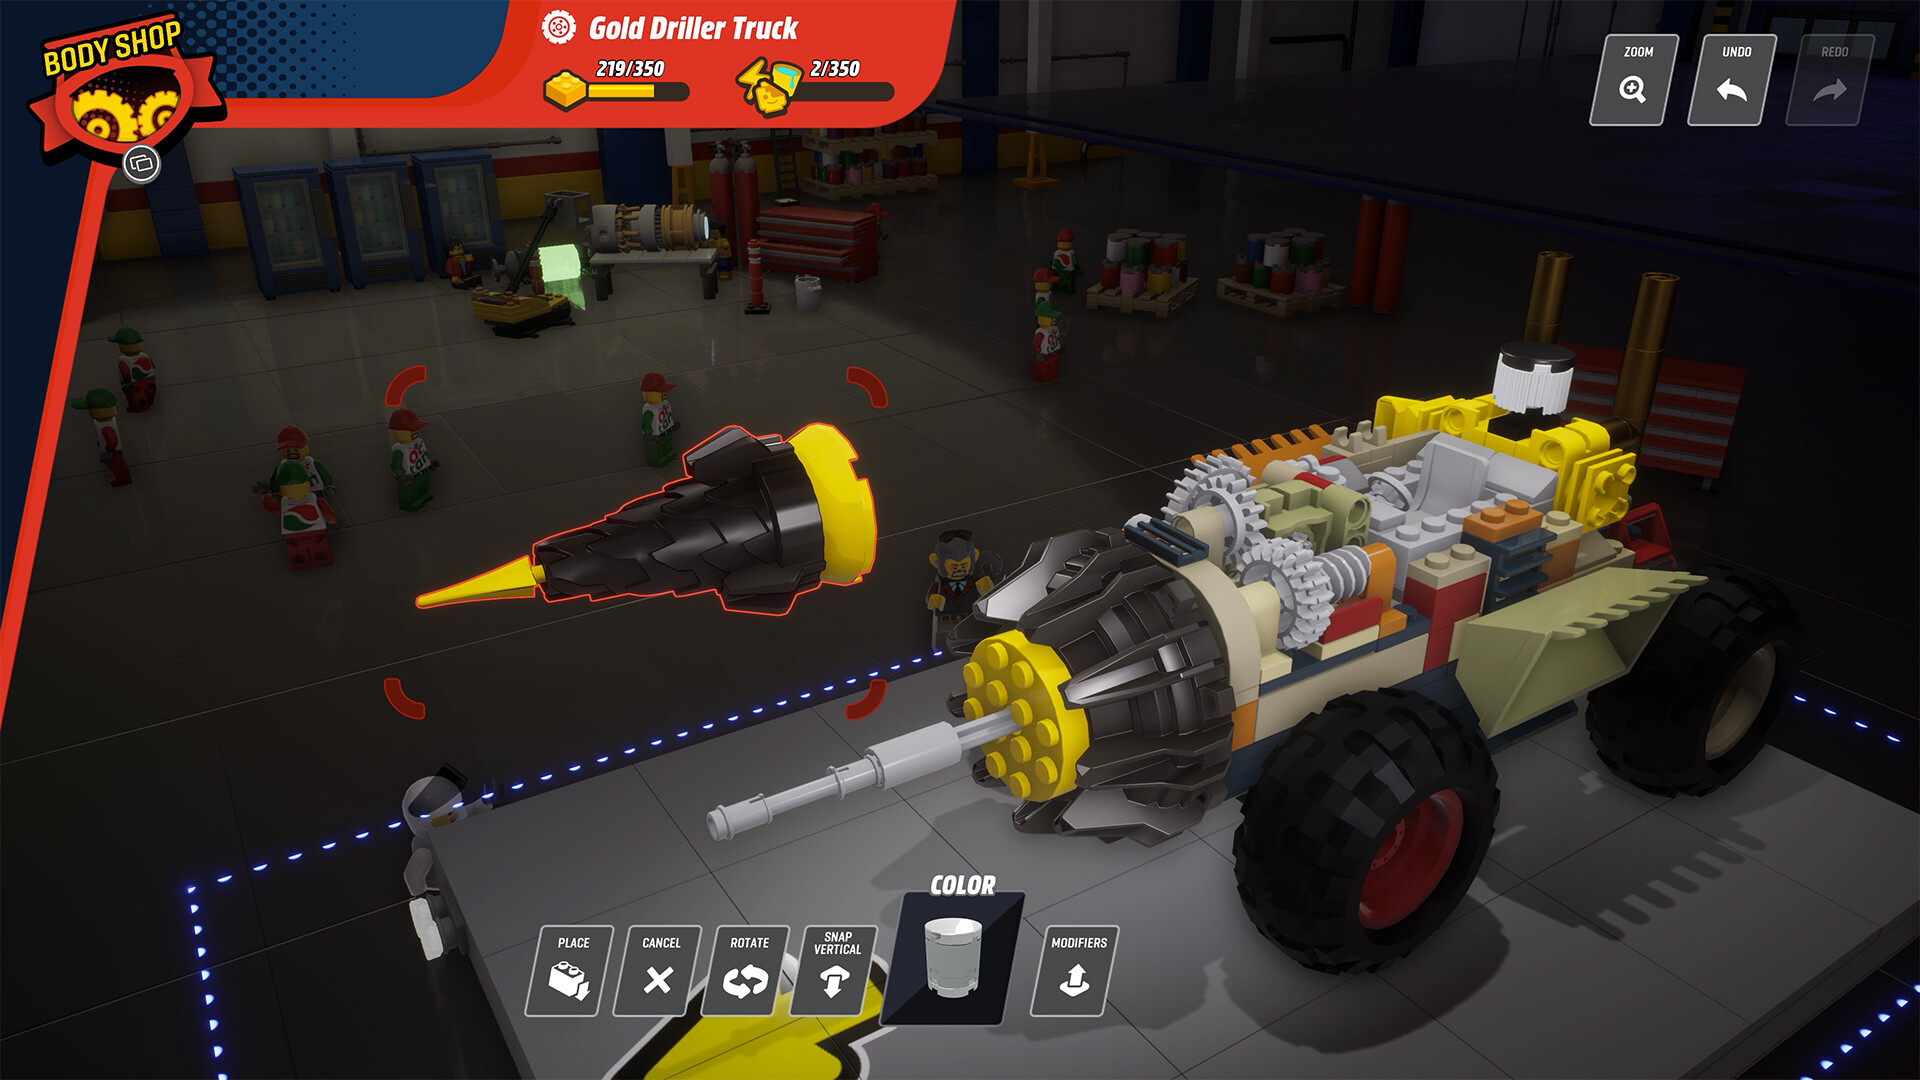 LEGO 2K Drive: Awesome Rivals Edition Steam CD Key